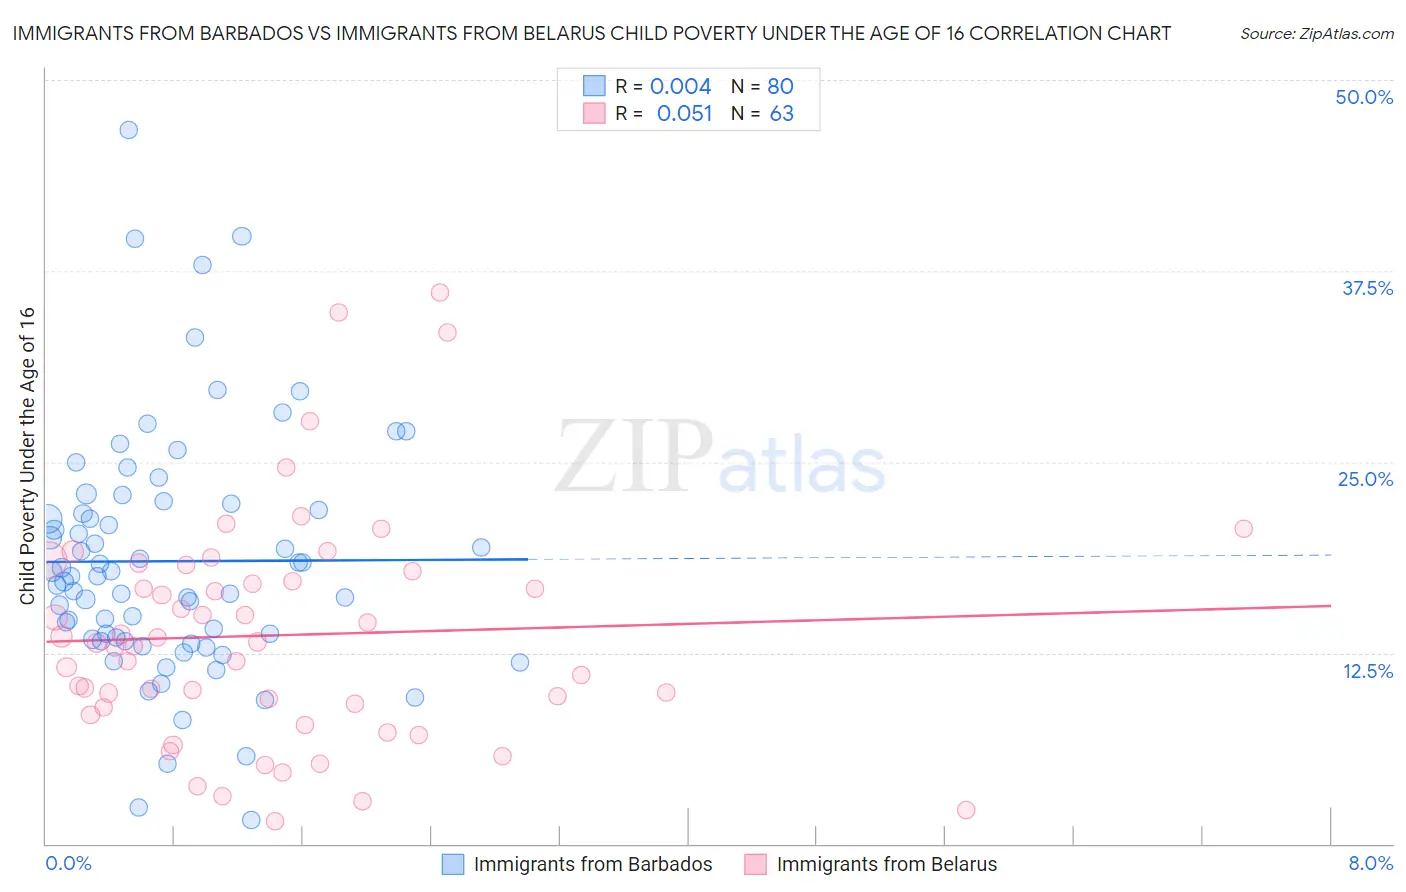 Immigrants from Barbados vs Immigrants from Belarus Child Poverty Under the Age of 16